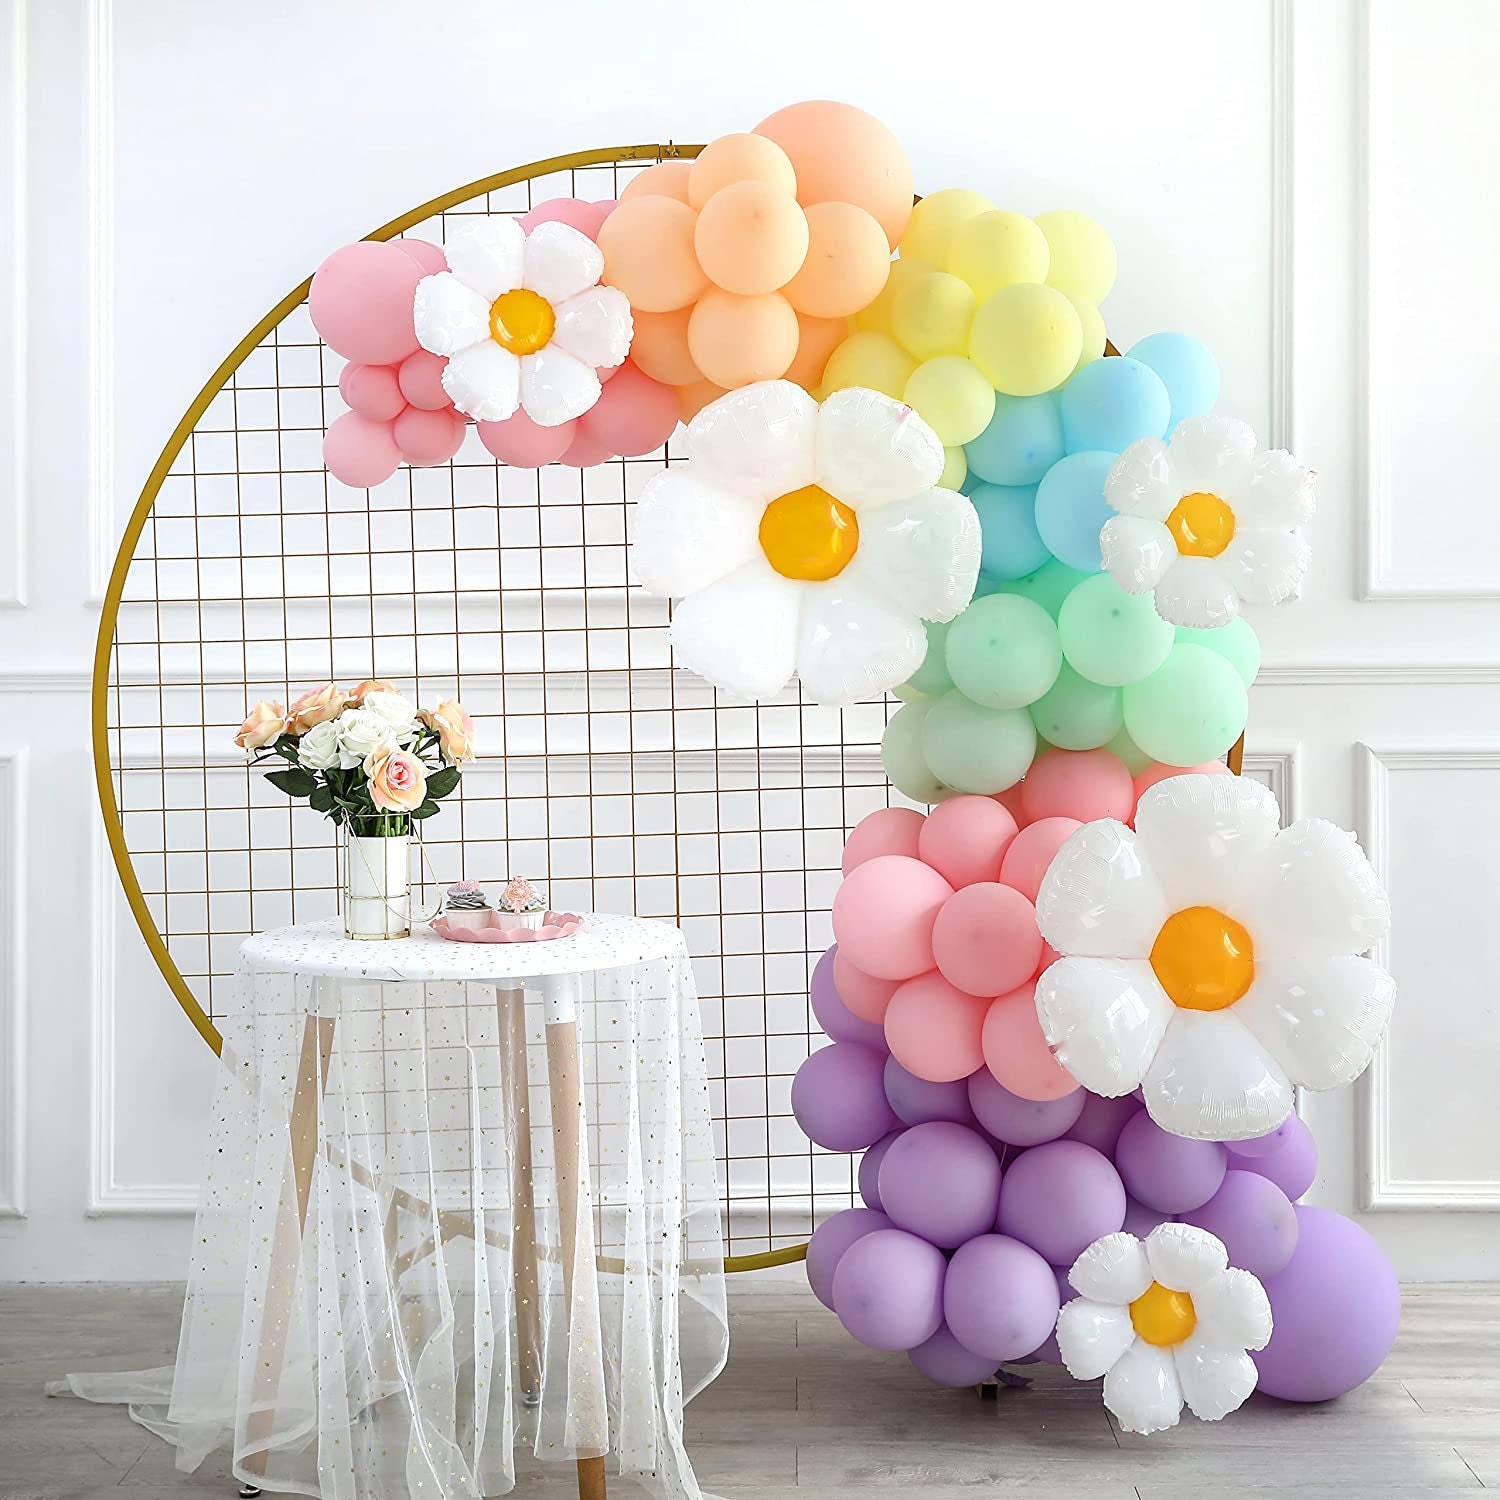 Daisy Pastel Balloons Garland Birthday Party Decorations Baby Shower Room  Layout Arch Set Light Macaron Groovy Balloon Party Supplies 